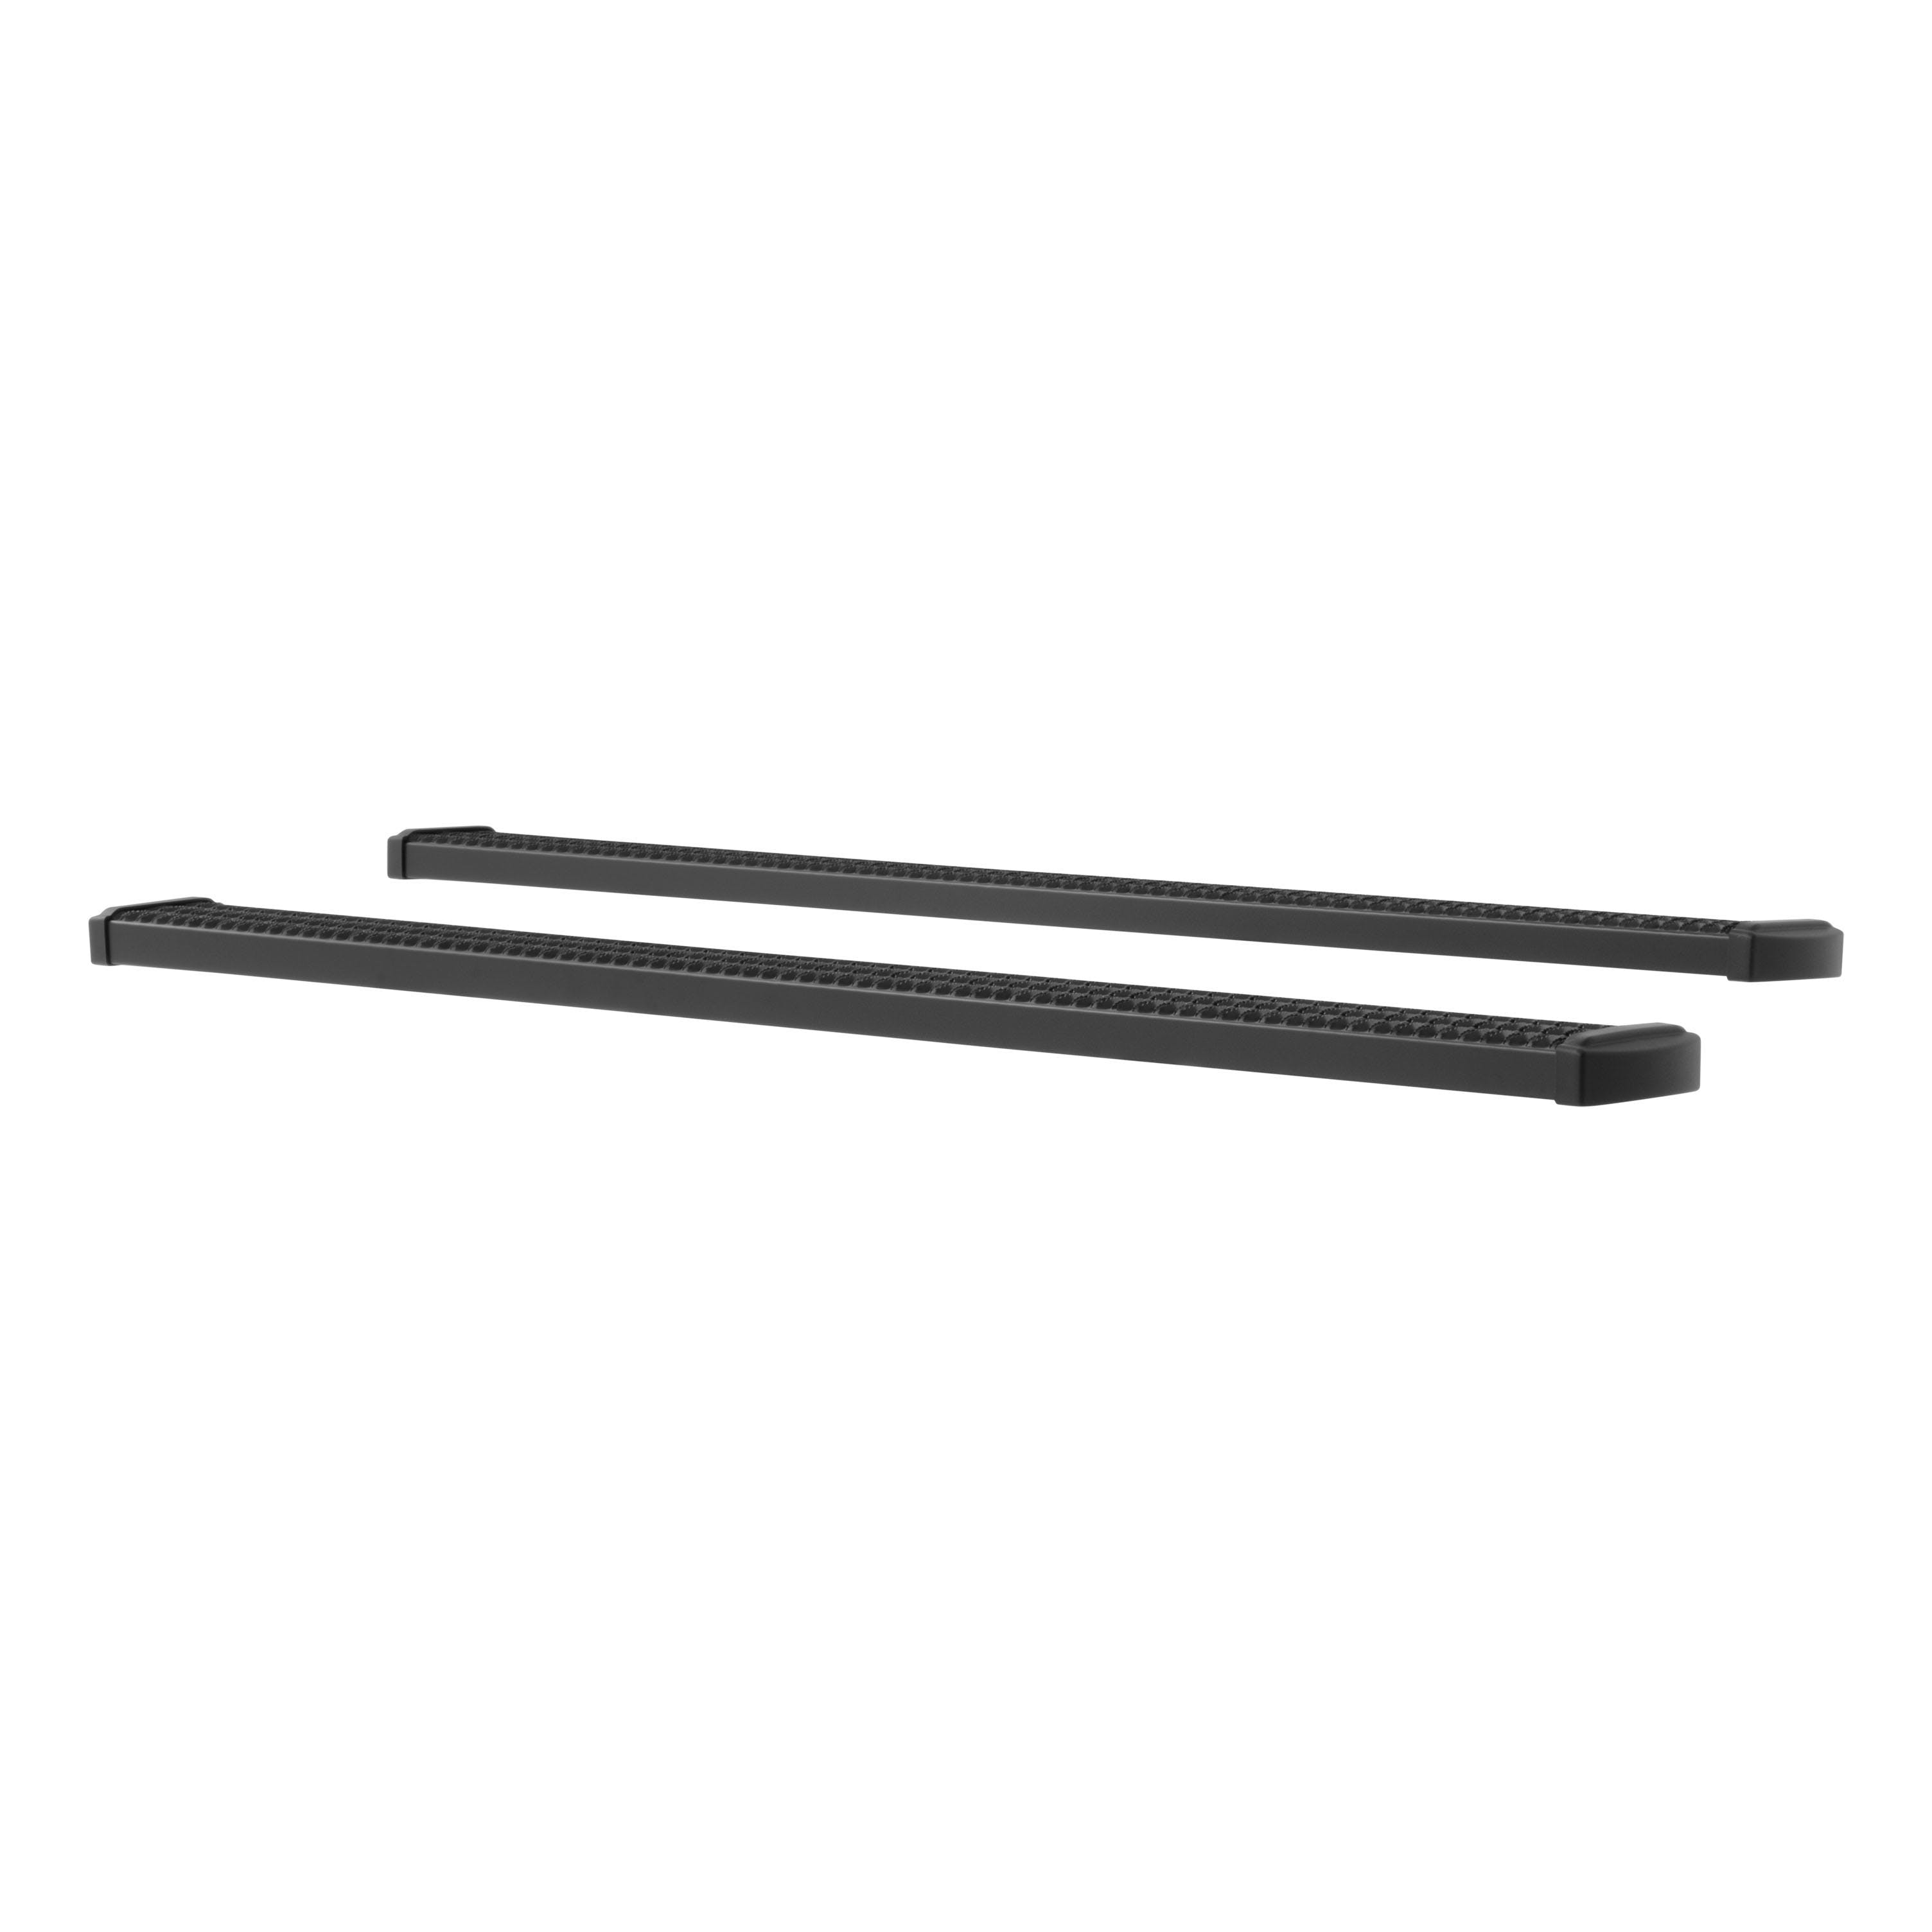 LUVERNE 415088-401632 Grip Step 7 inch Running Boards